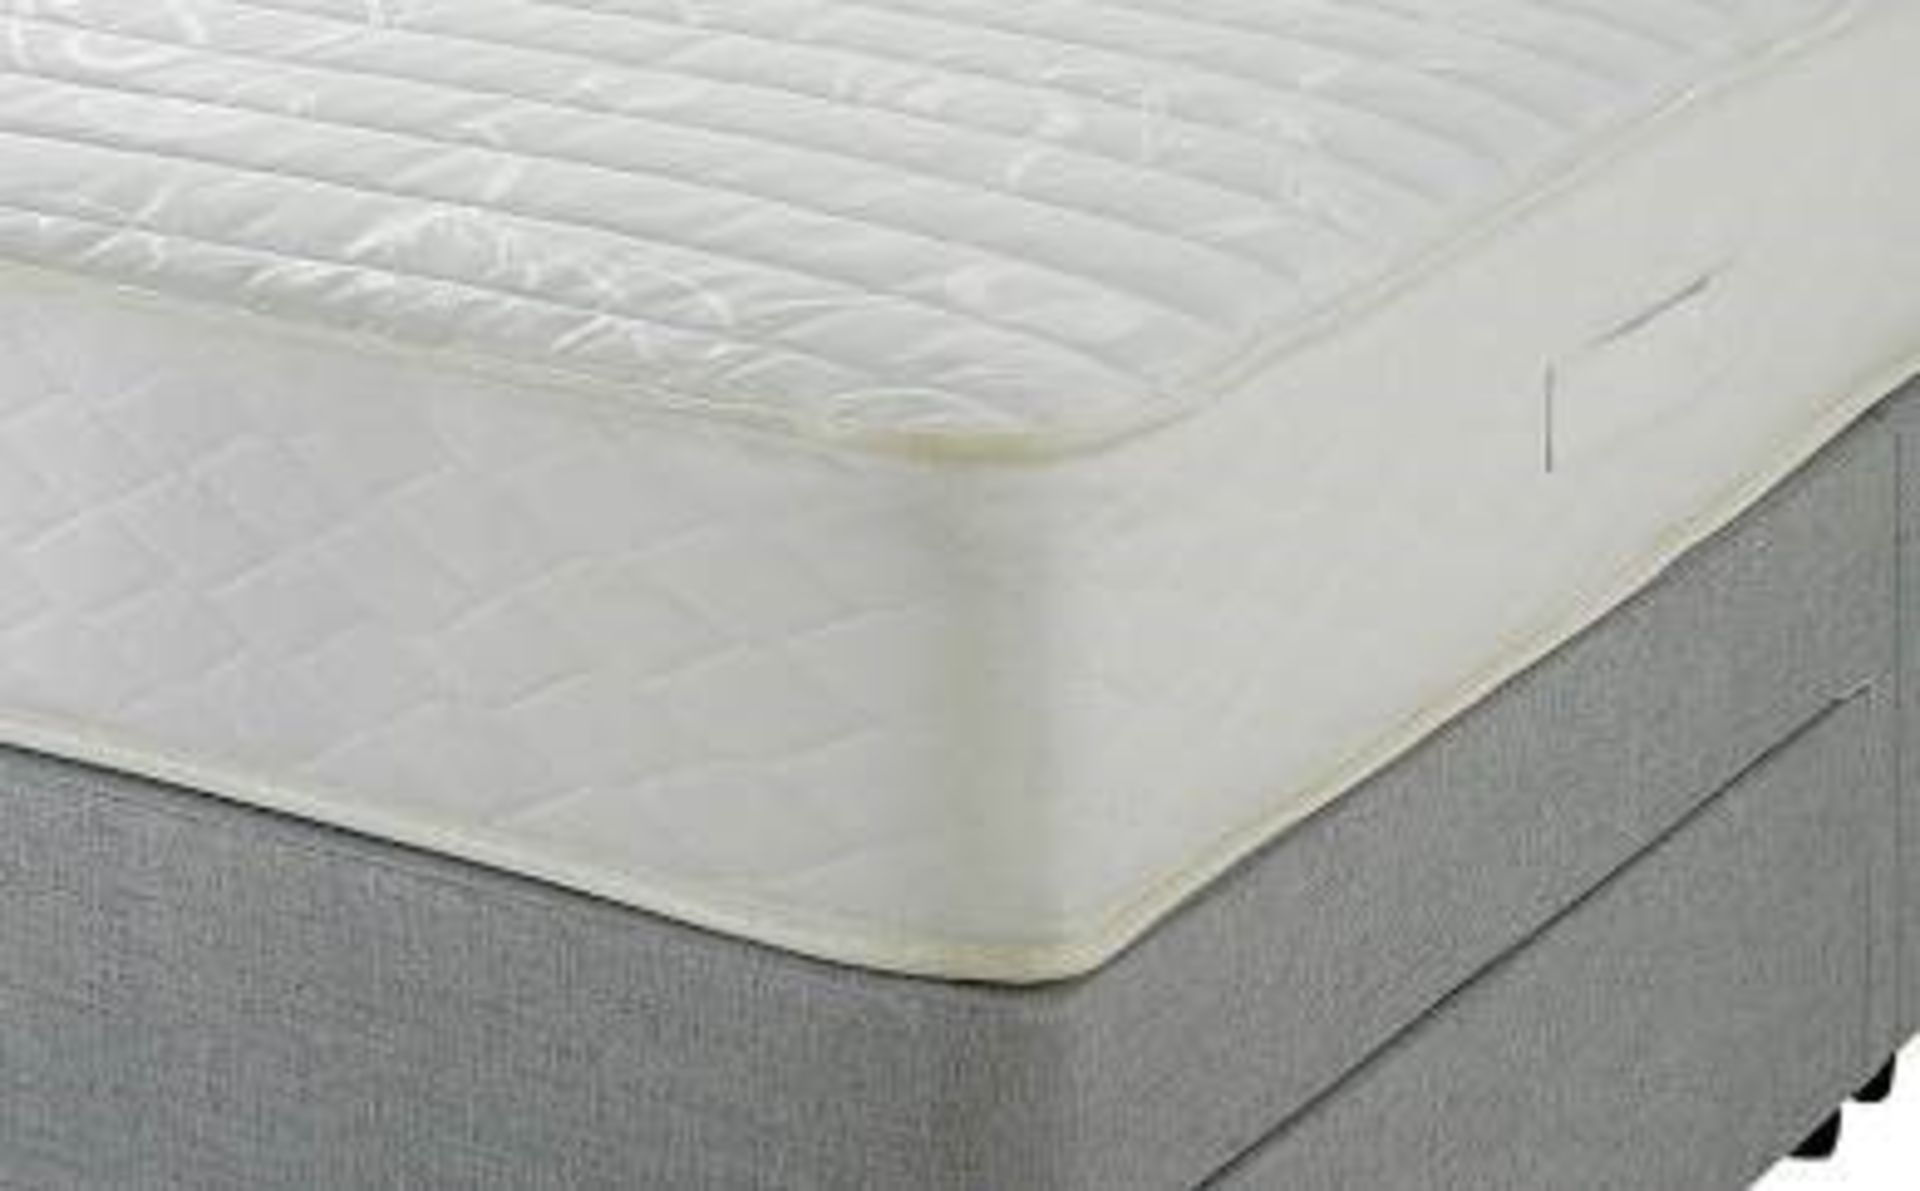 1 GRADE B 4FT6 DOUBLE POSTURE FLEX MEMORY FOAM MATTRESS (VIEWING HIGHLY RECOMMENDED)